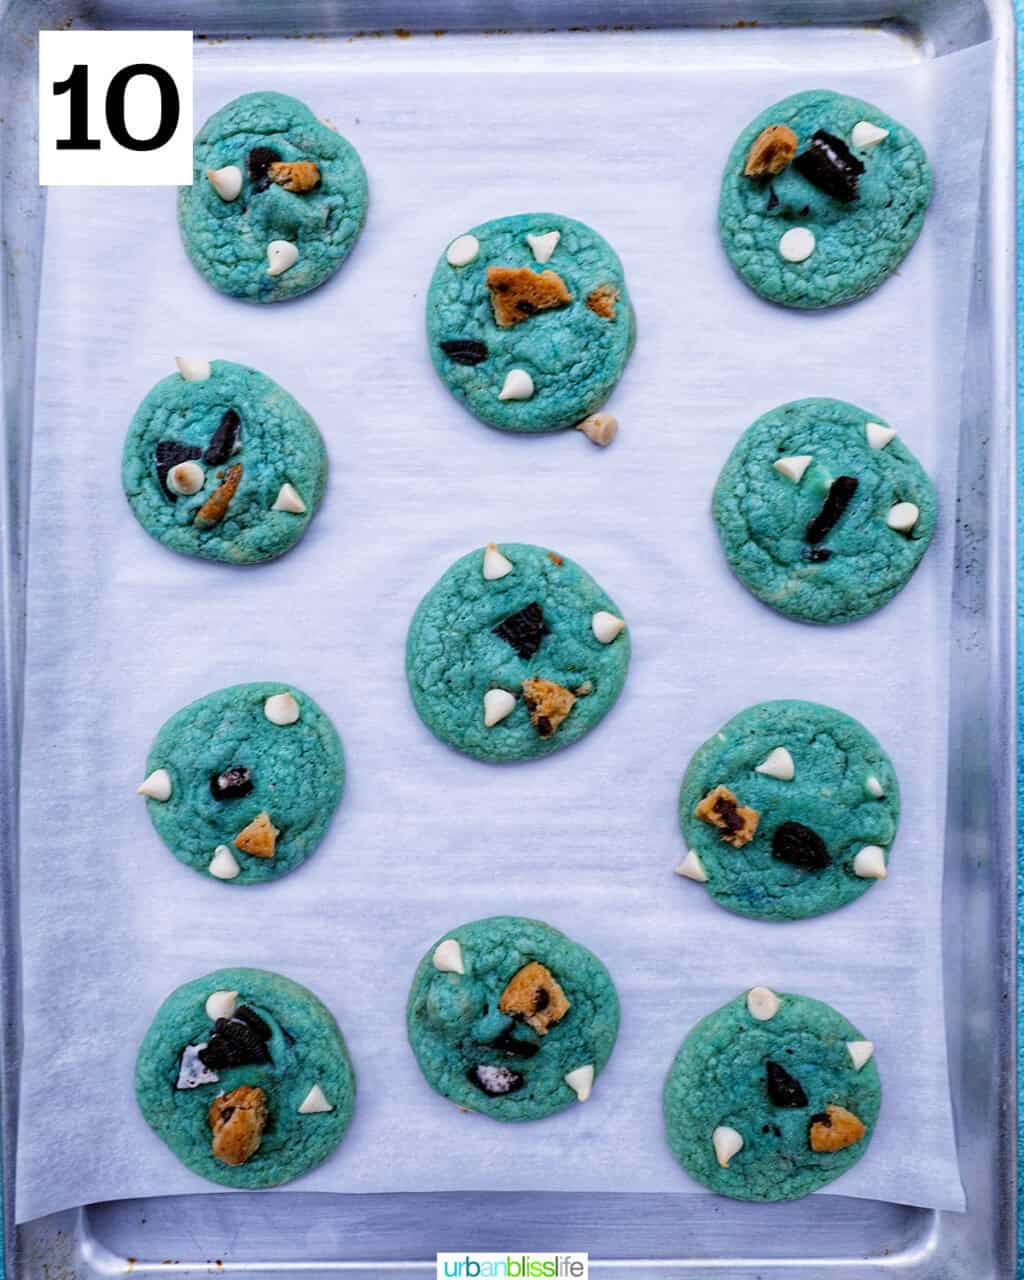 baking sheet with cookie monster cookies.